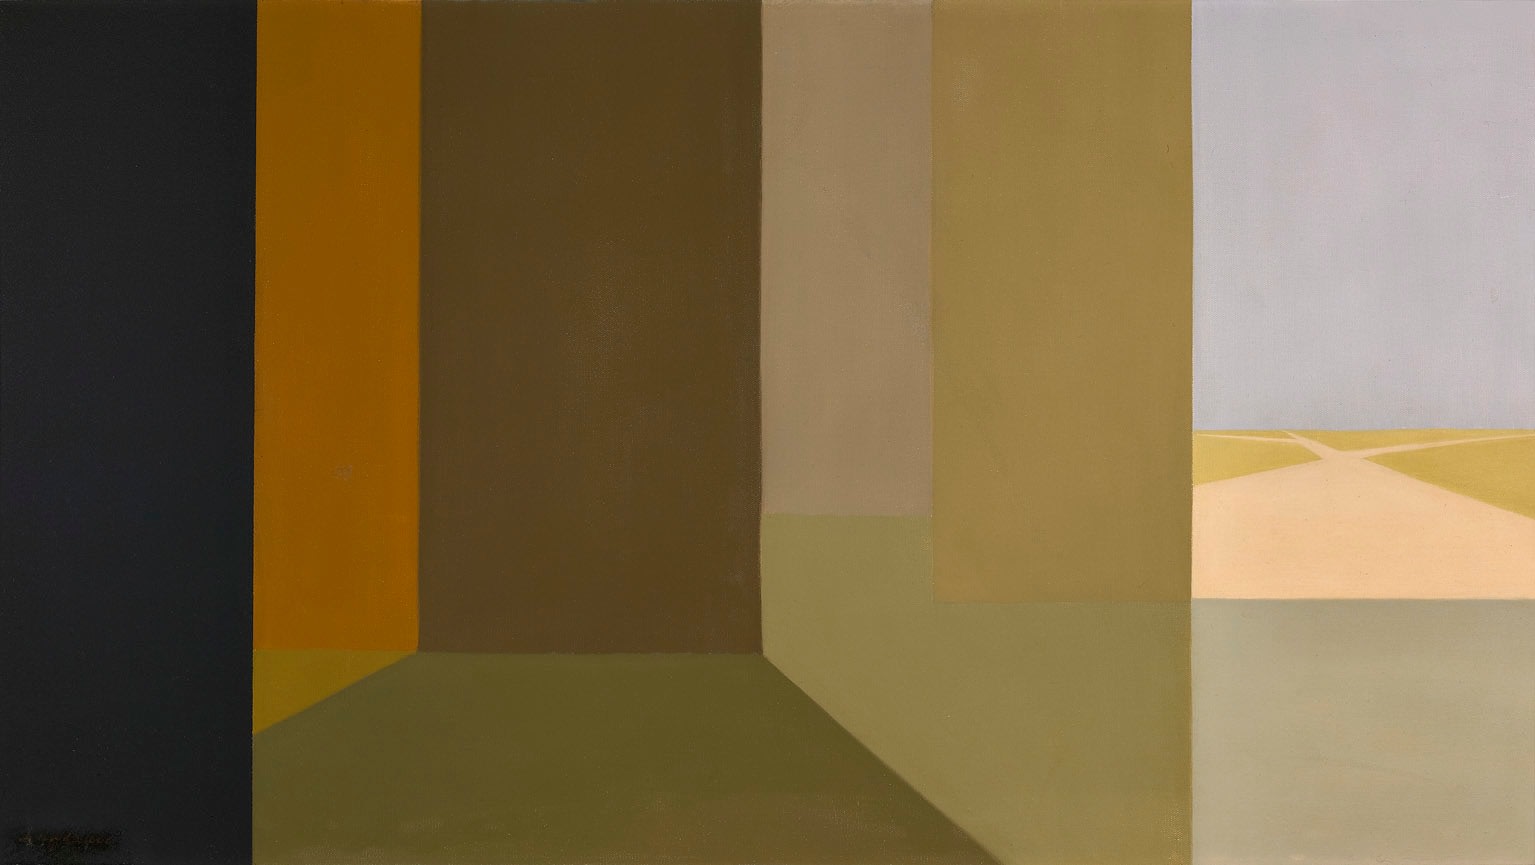 Helen Lundeberg

The Road, 1958

oil on canvas

20 x 36 inches; 50.8 x 91.4 centimeters

LSFA# 10485